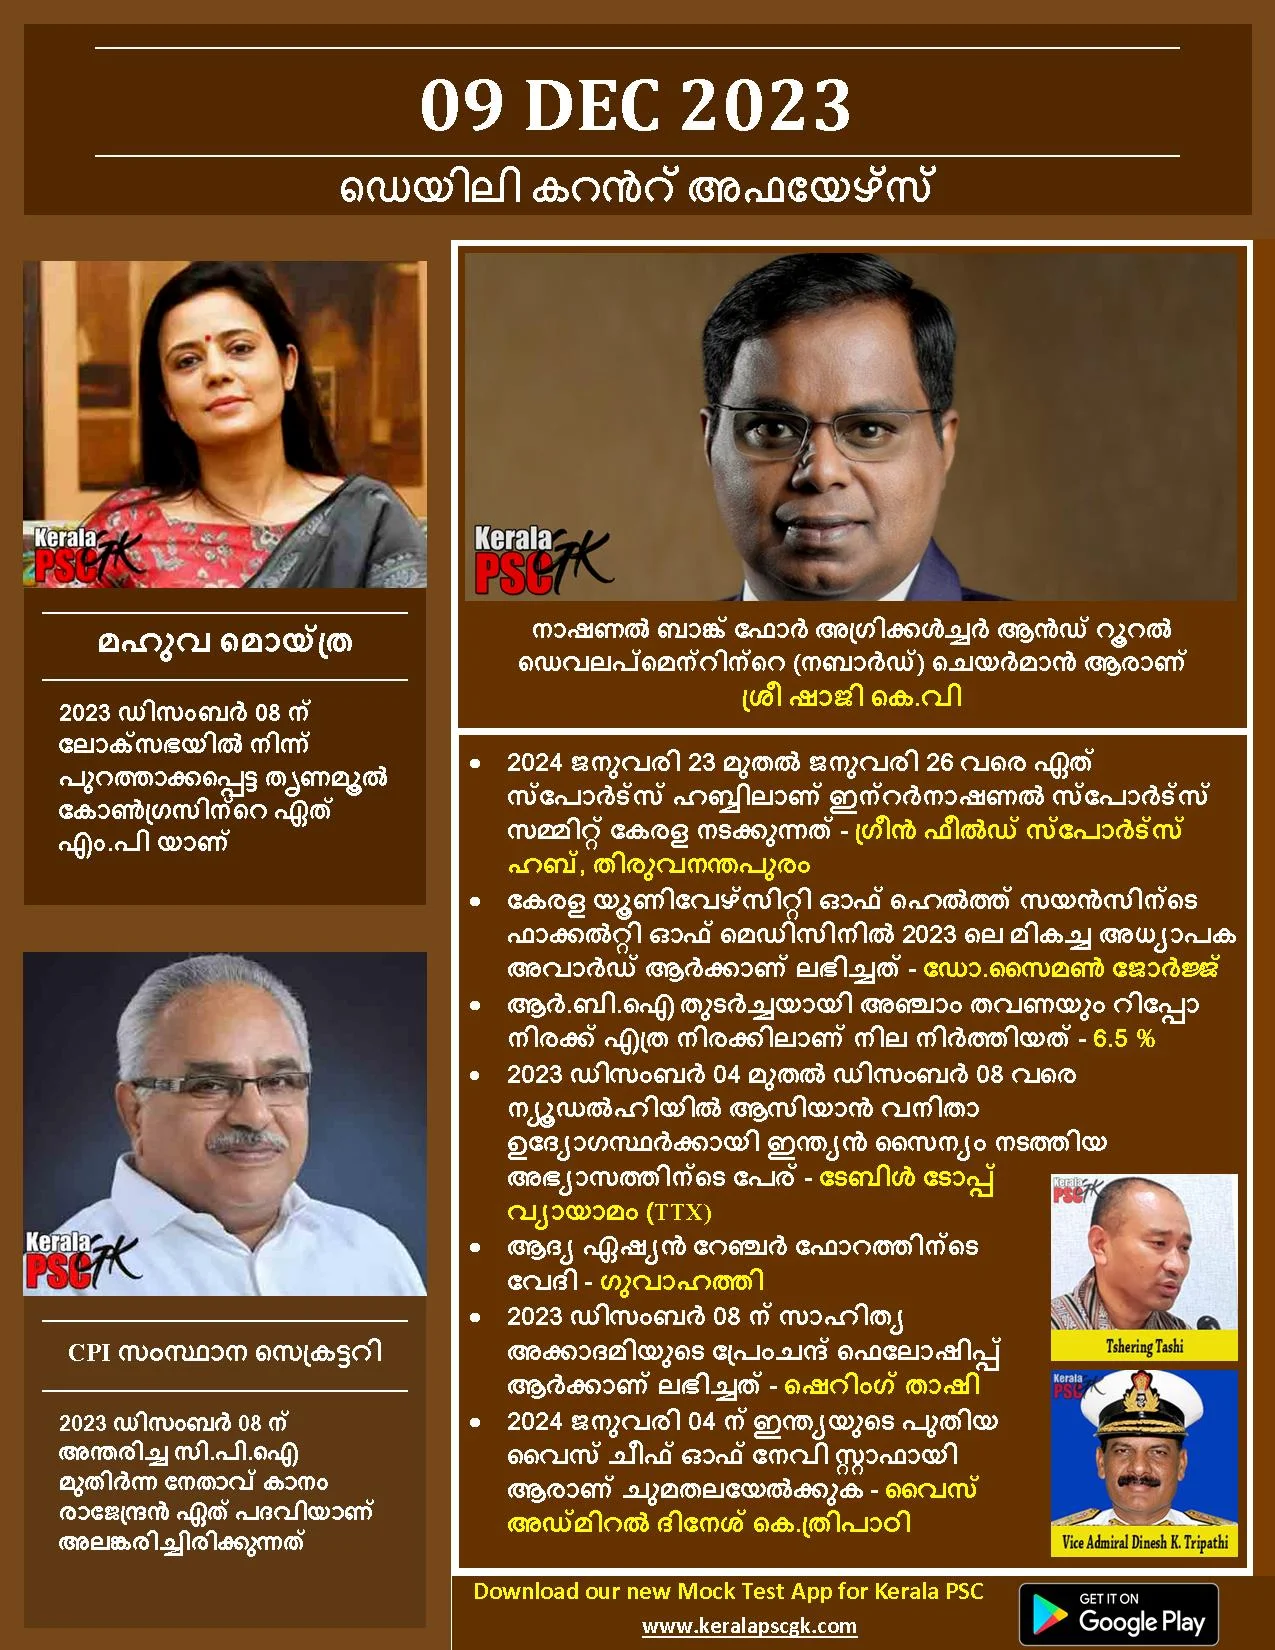 Daily Current Affairs in Malayalam 09 Dec 2023